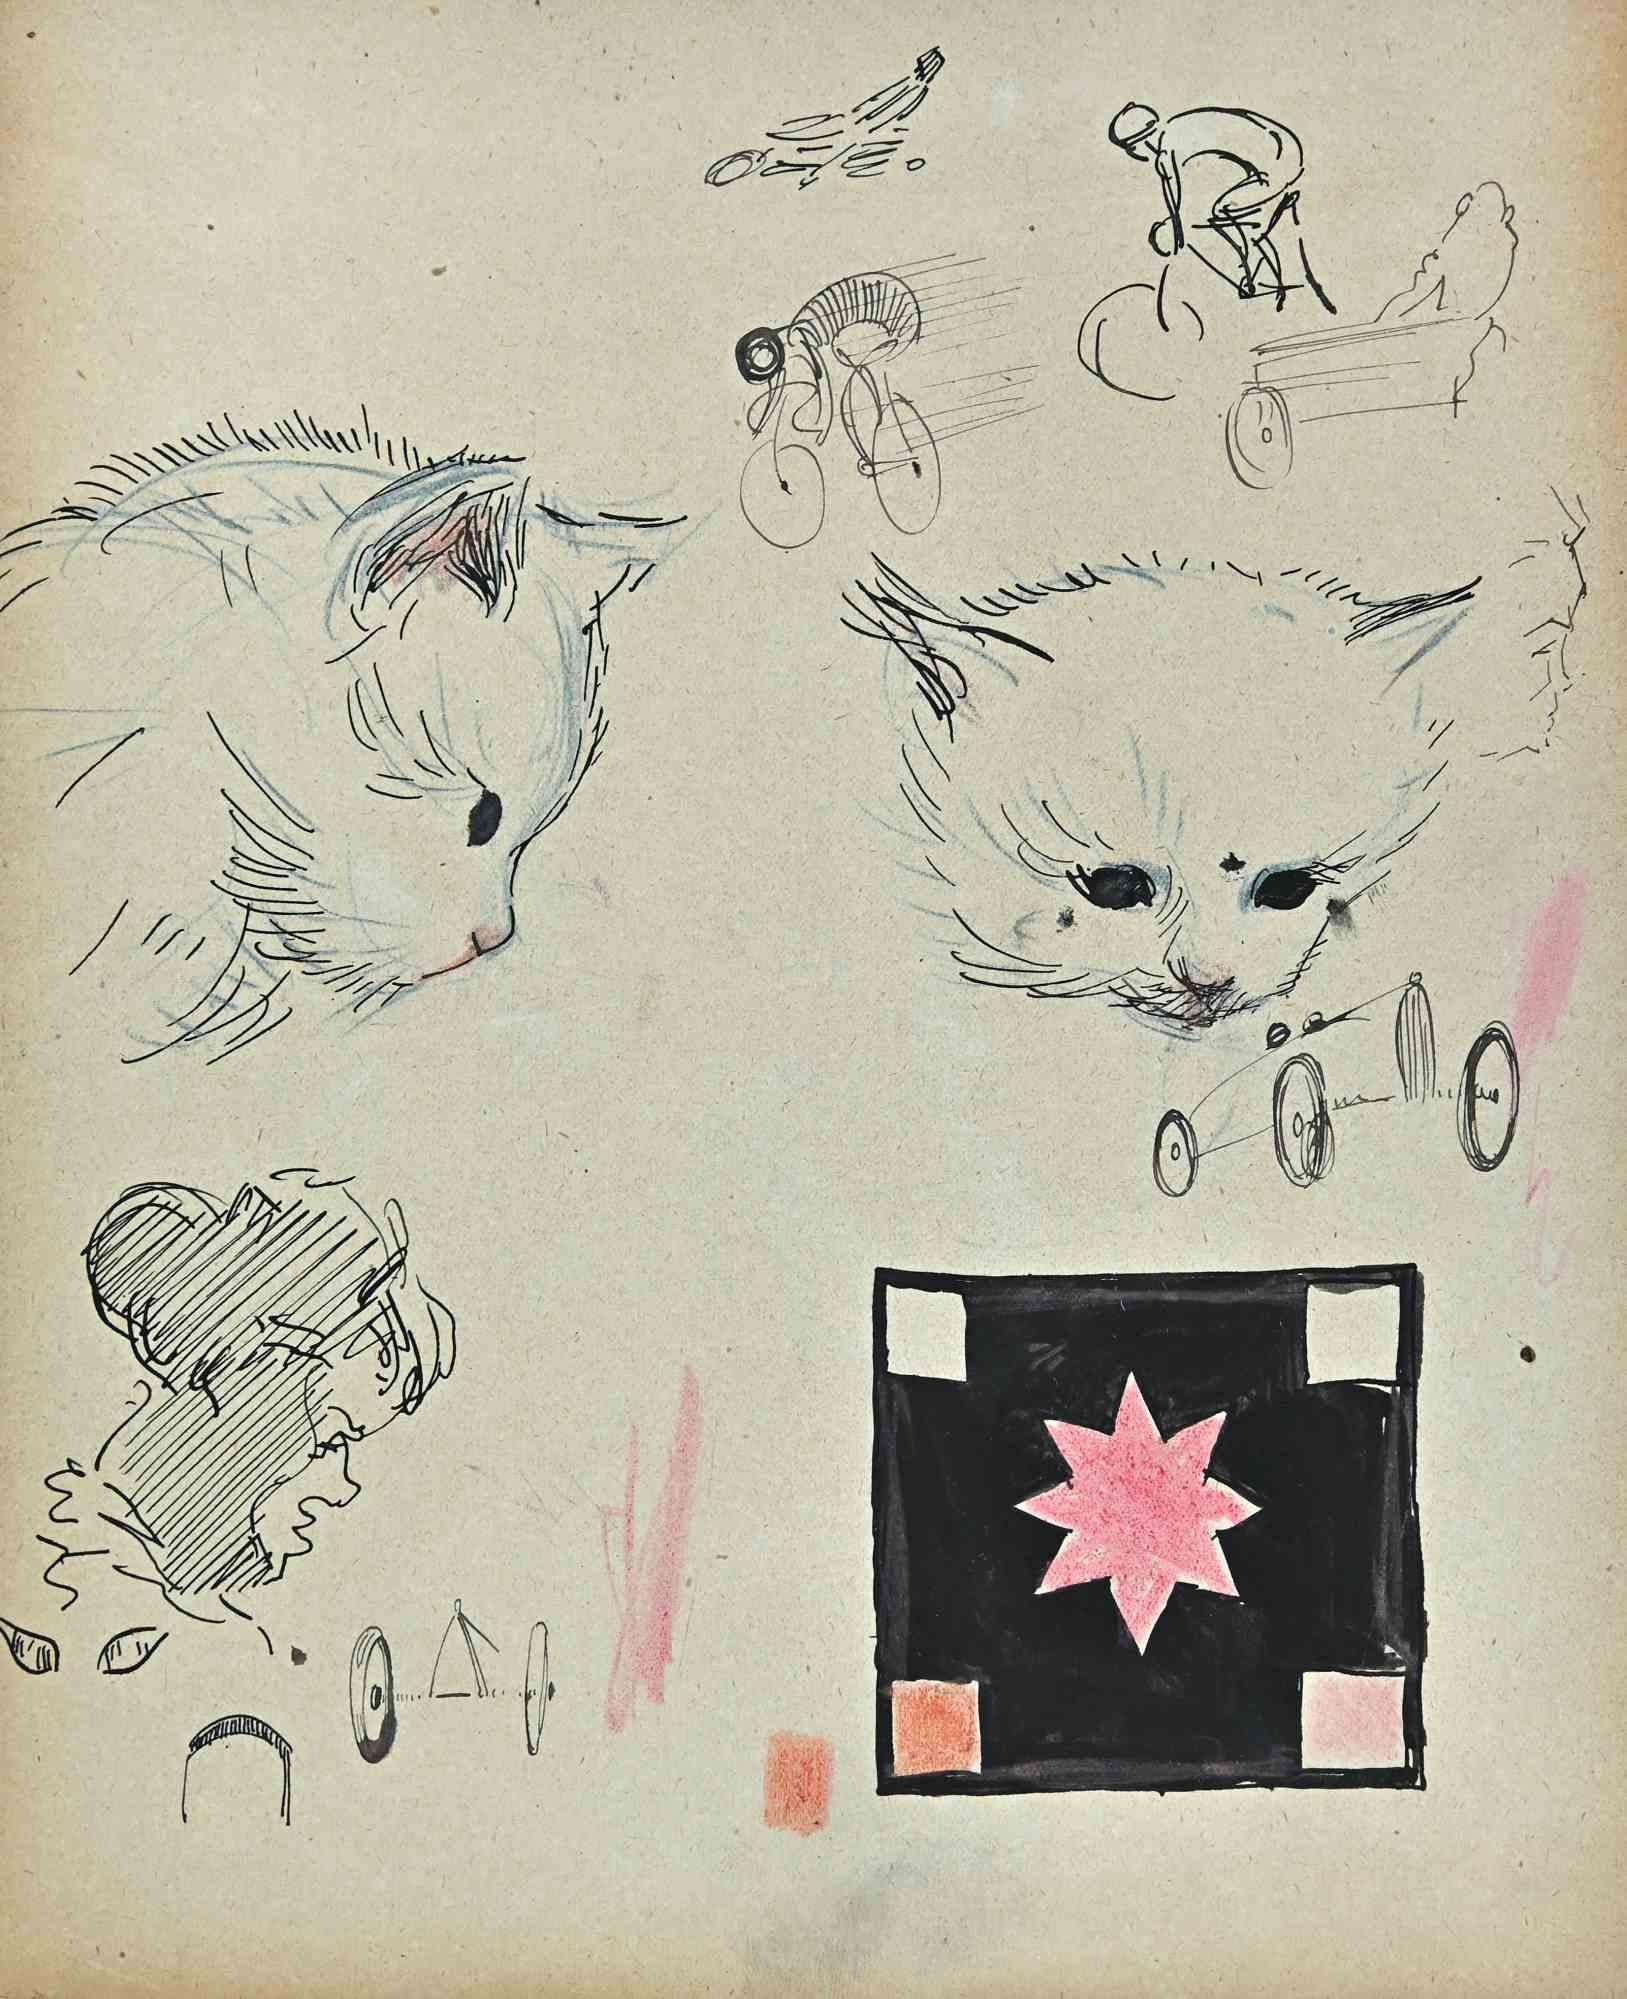 Cats and Riders - Original Drawing by Norbert Meyre - Mid-20th Century